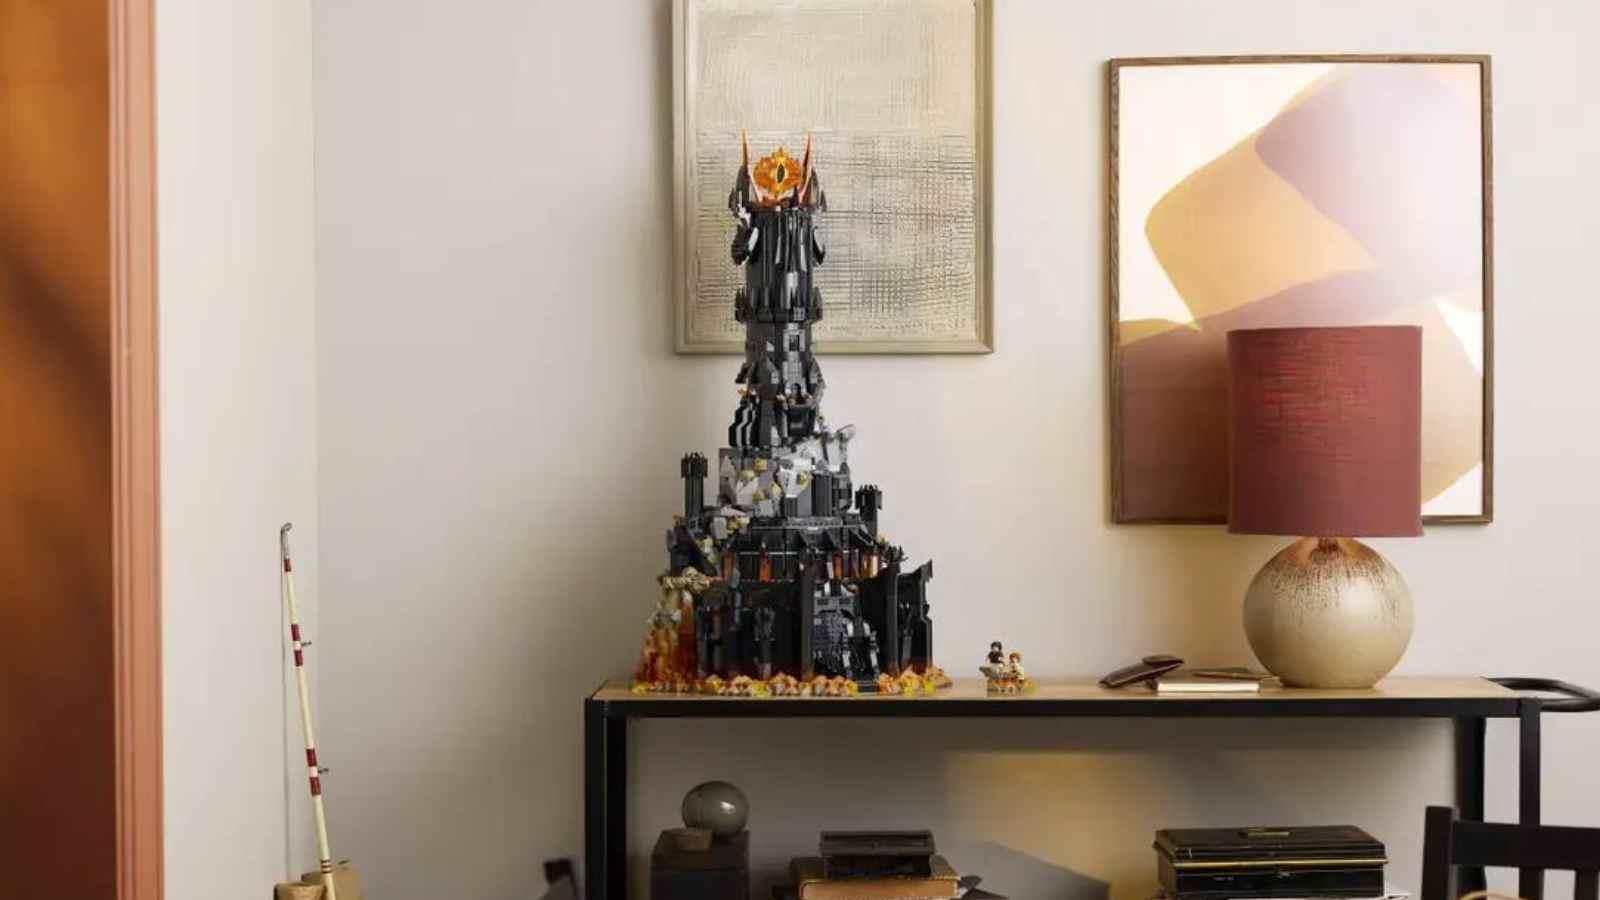 The The LEGO Icons The Lord of the Rings Barad-dûr on display